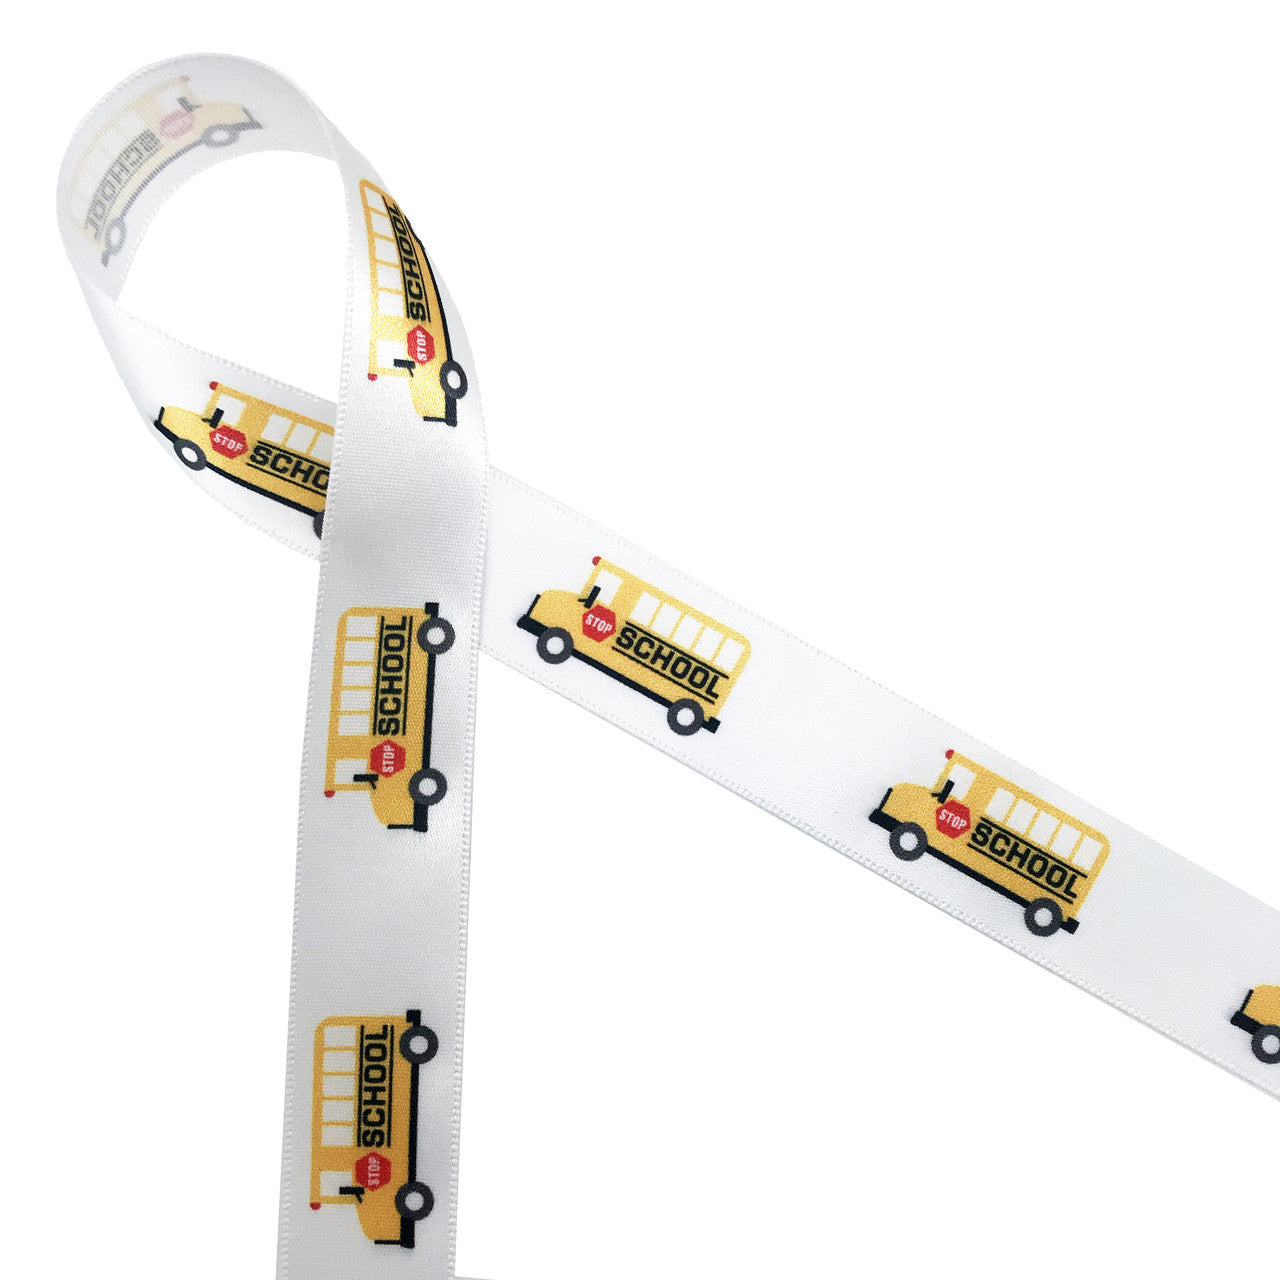 Yellow school bus ribbon with a red stop sign printed on 5/8" white single face satin is the ideal ribbon for a gift for your favorite school bus driver! This is a great ribbon for cookies, cake pops, gift wrap and party decor for Back to school celebrations! Use this ribbon for lanyards, hair bows, sewing and quilting projects too! All our ribbon is designed and printed in the USA